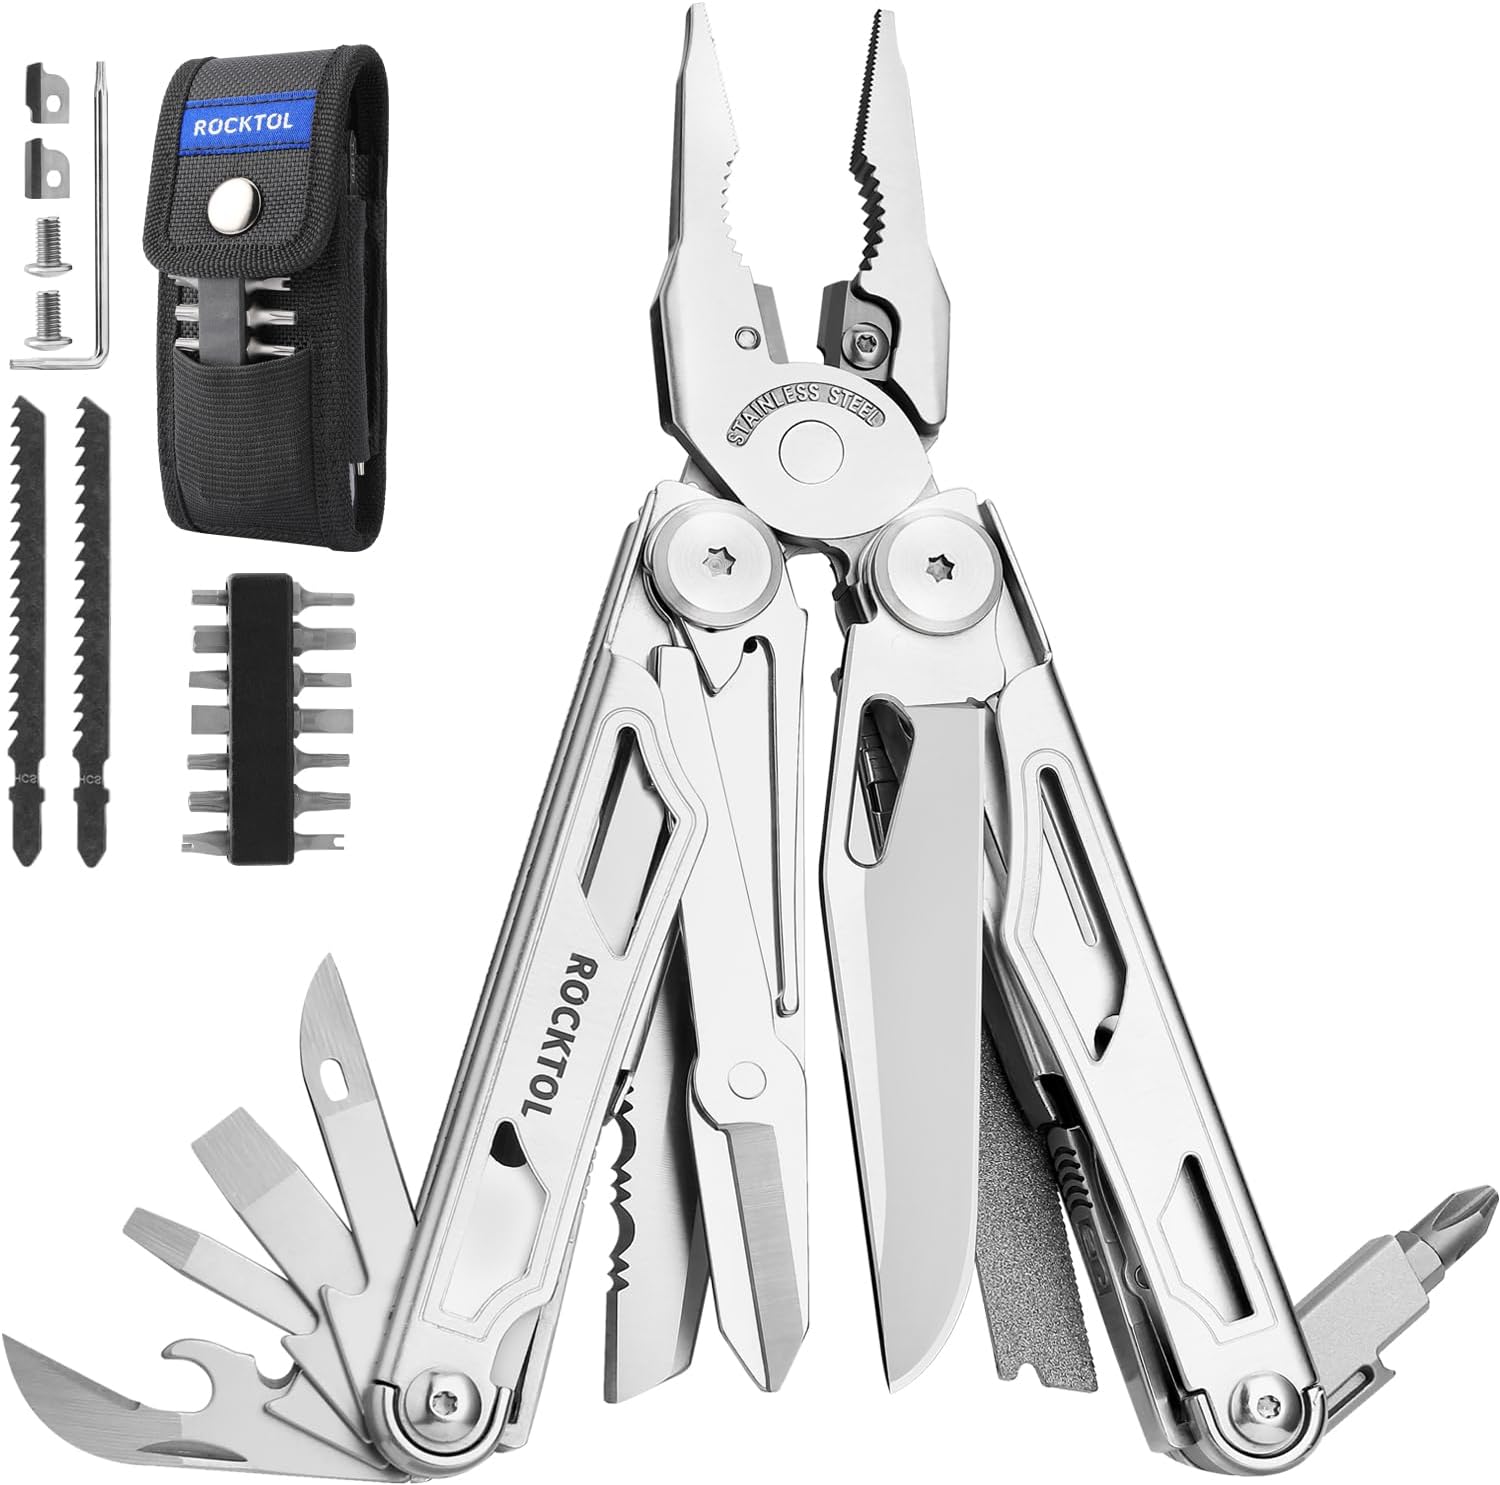 Multitool, 29-in-1 Multitool Pliers with Replaceable Wire Cutters and Saw, Heavy-duty Stainless Steel Multitool Set and Nylon Sheath for Camping Survival Gifts for Man